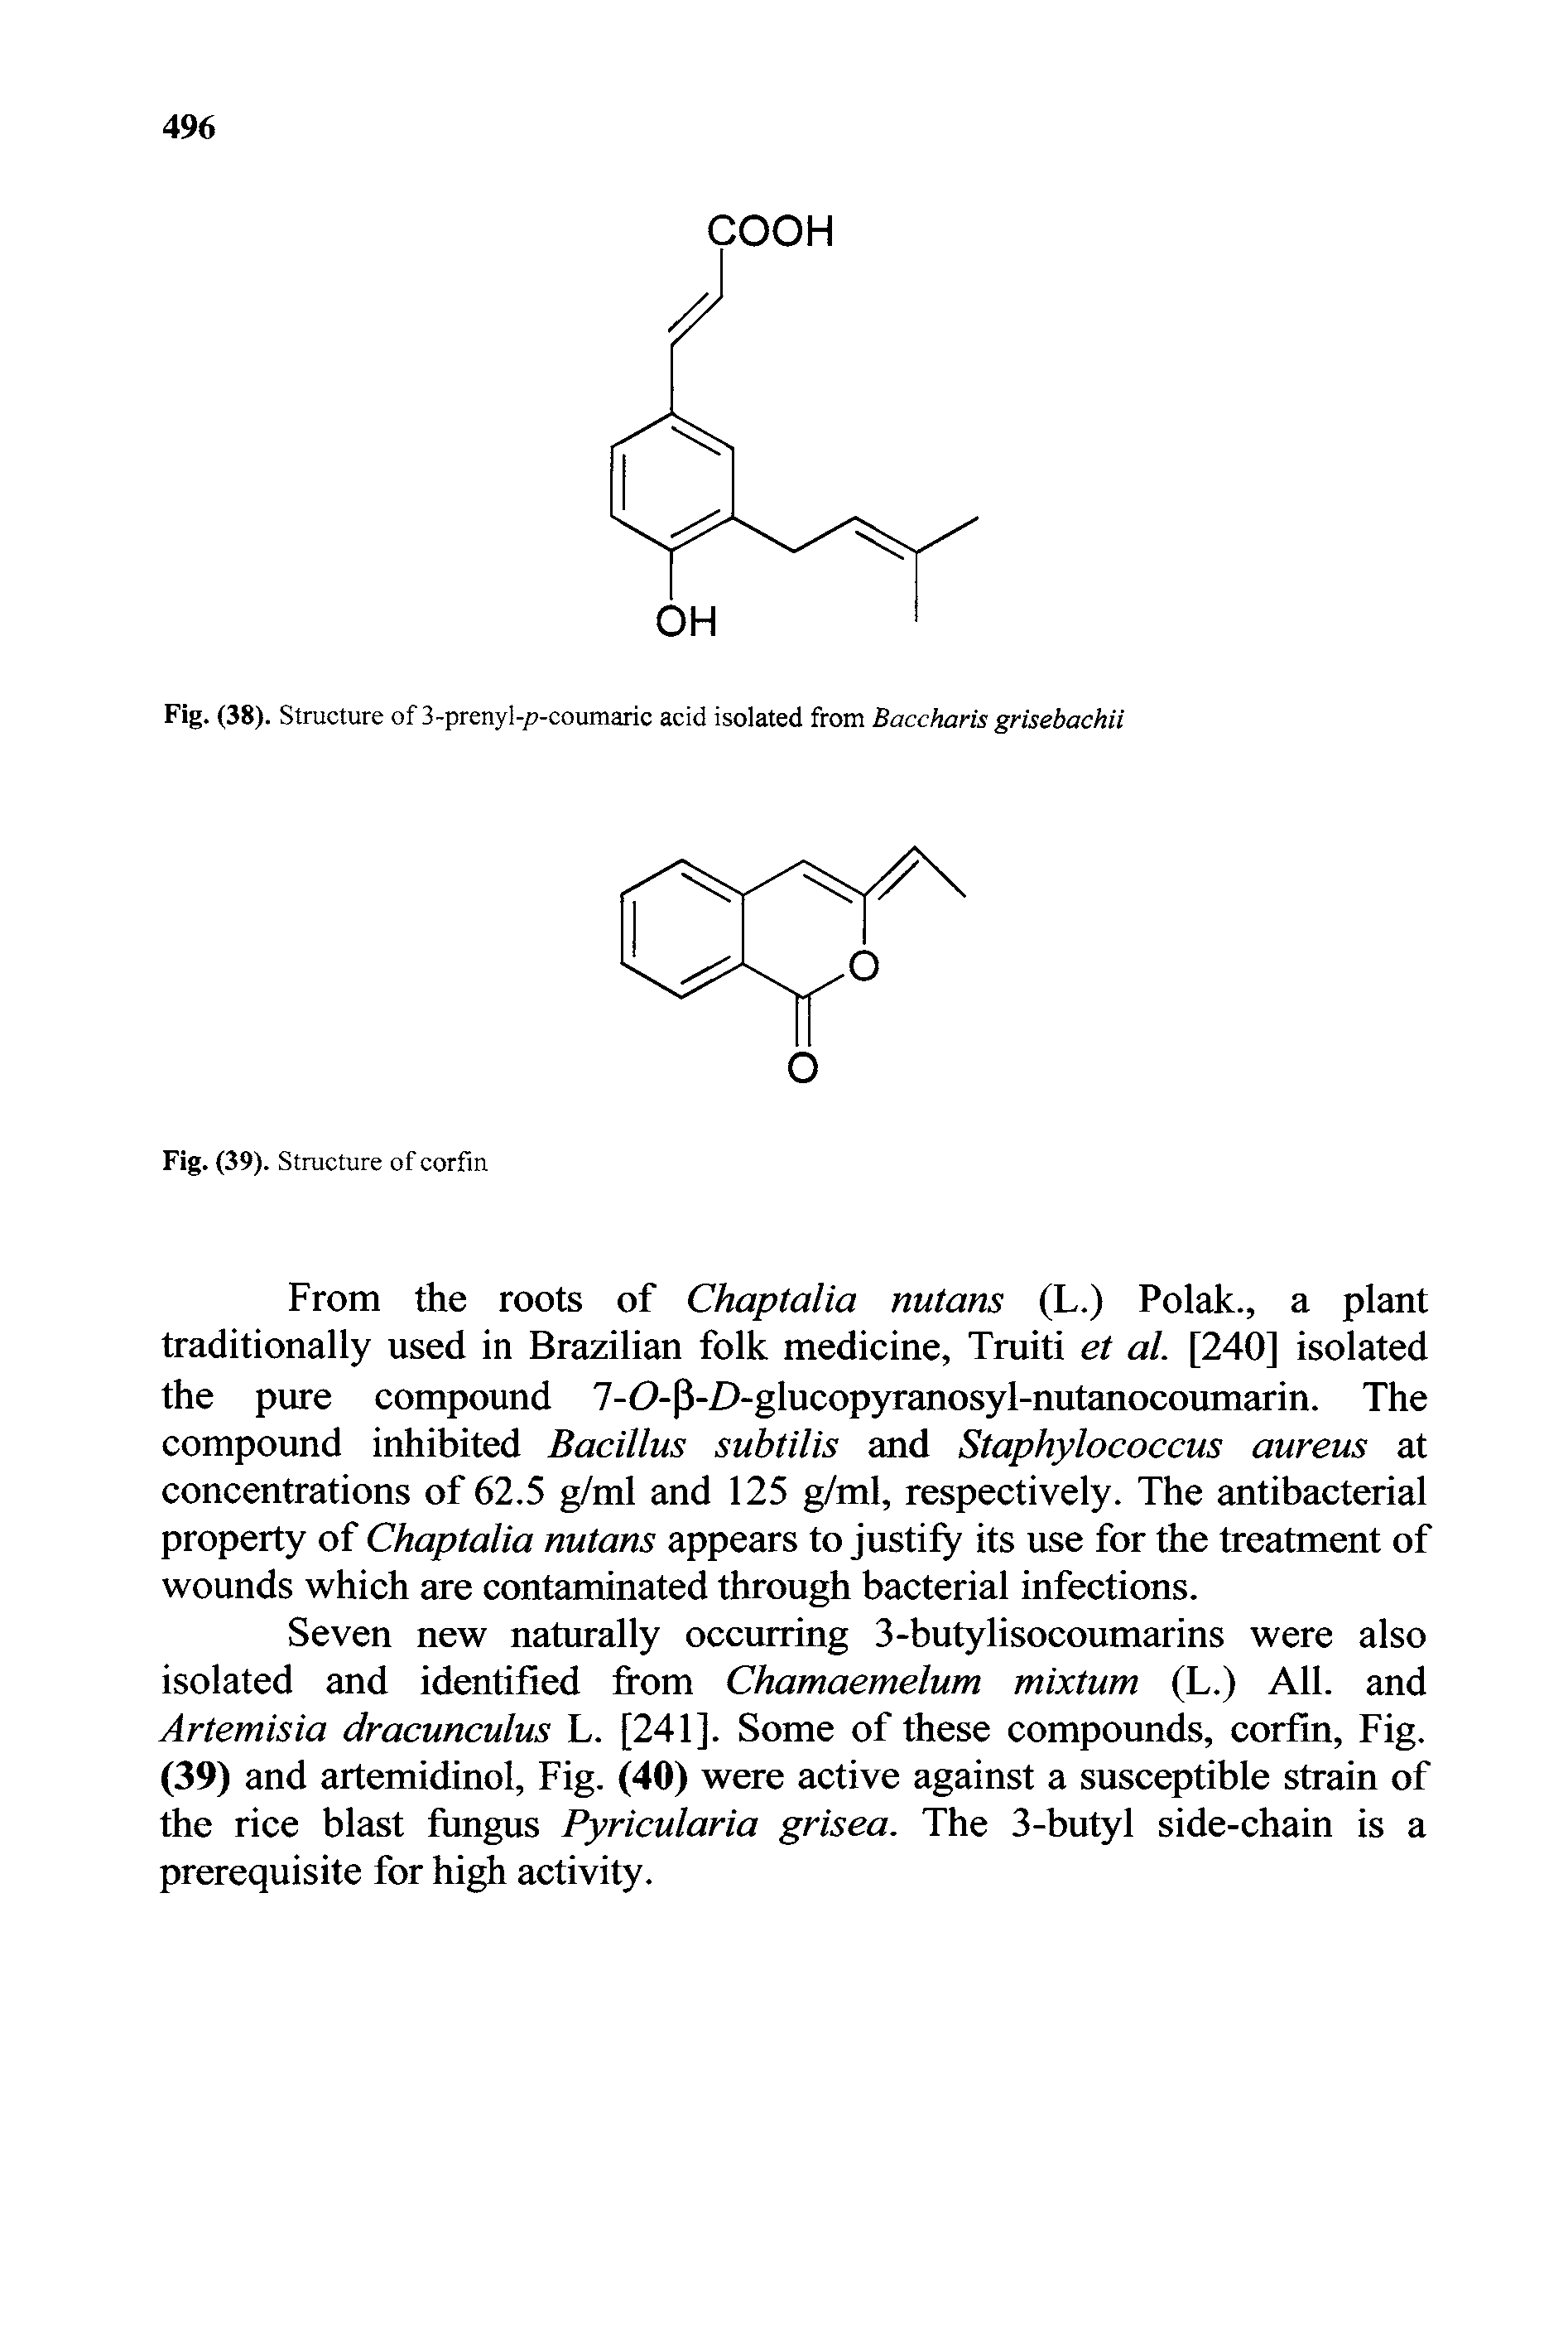 Fig. (38). Structure of 3-prenyl-p-coumaric acid isolated from Baccharis grisebachii...